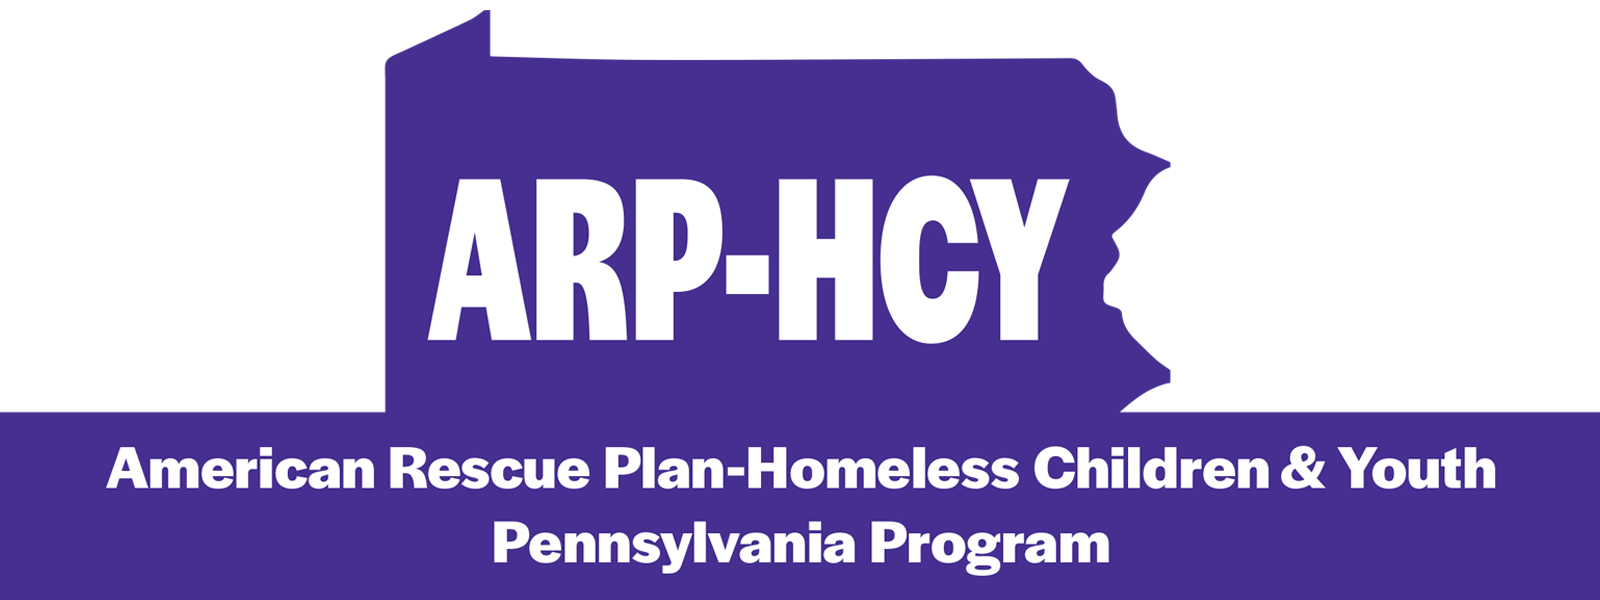 American Rescue Plan - Homeless Children and Youth Pennsylvania Program